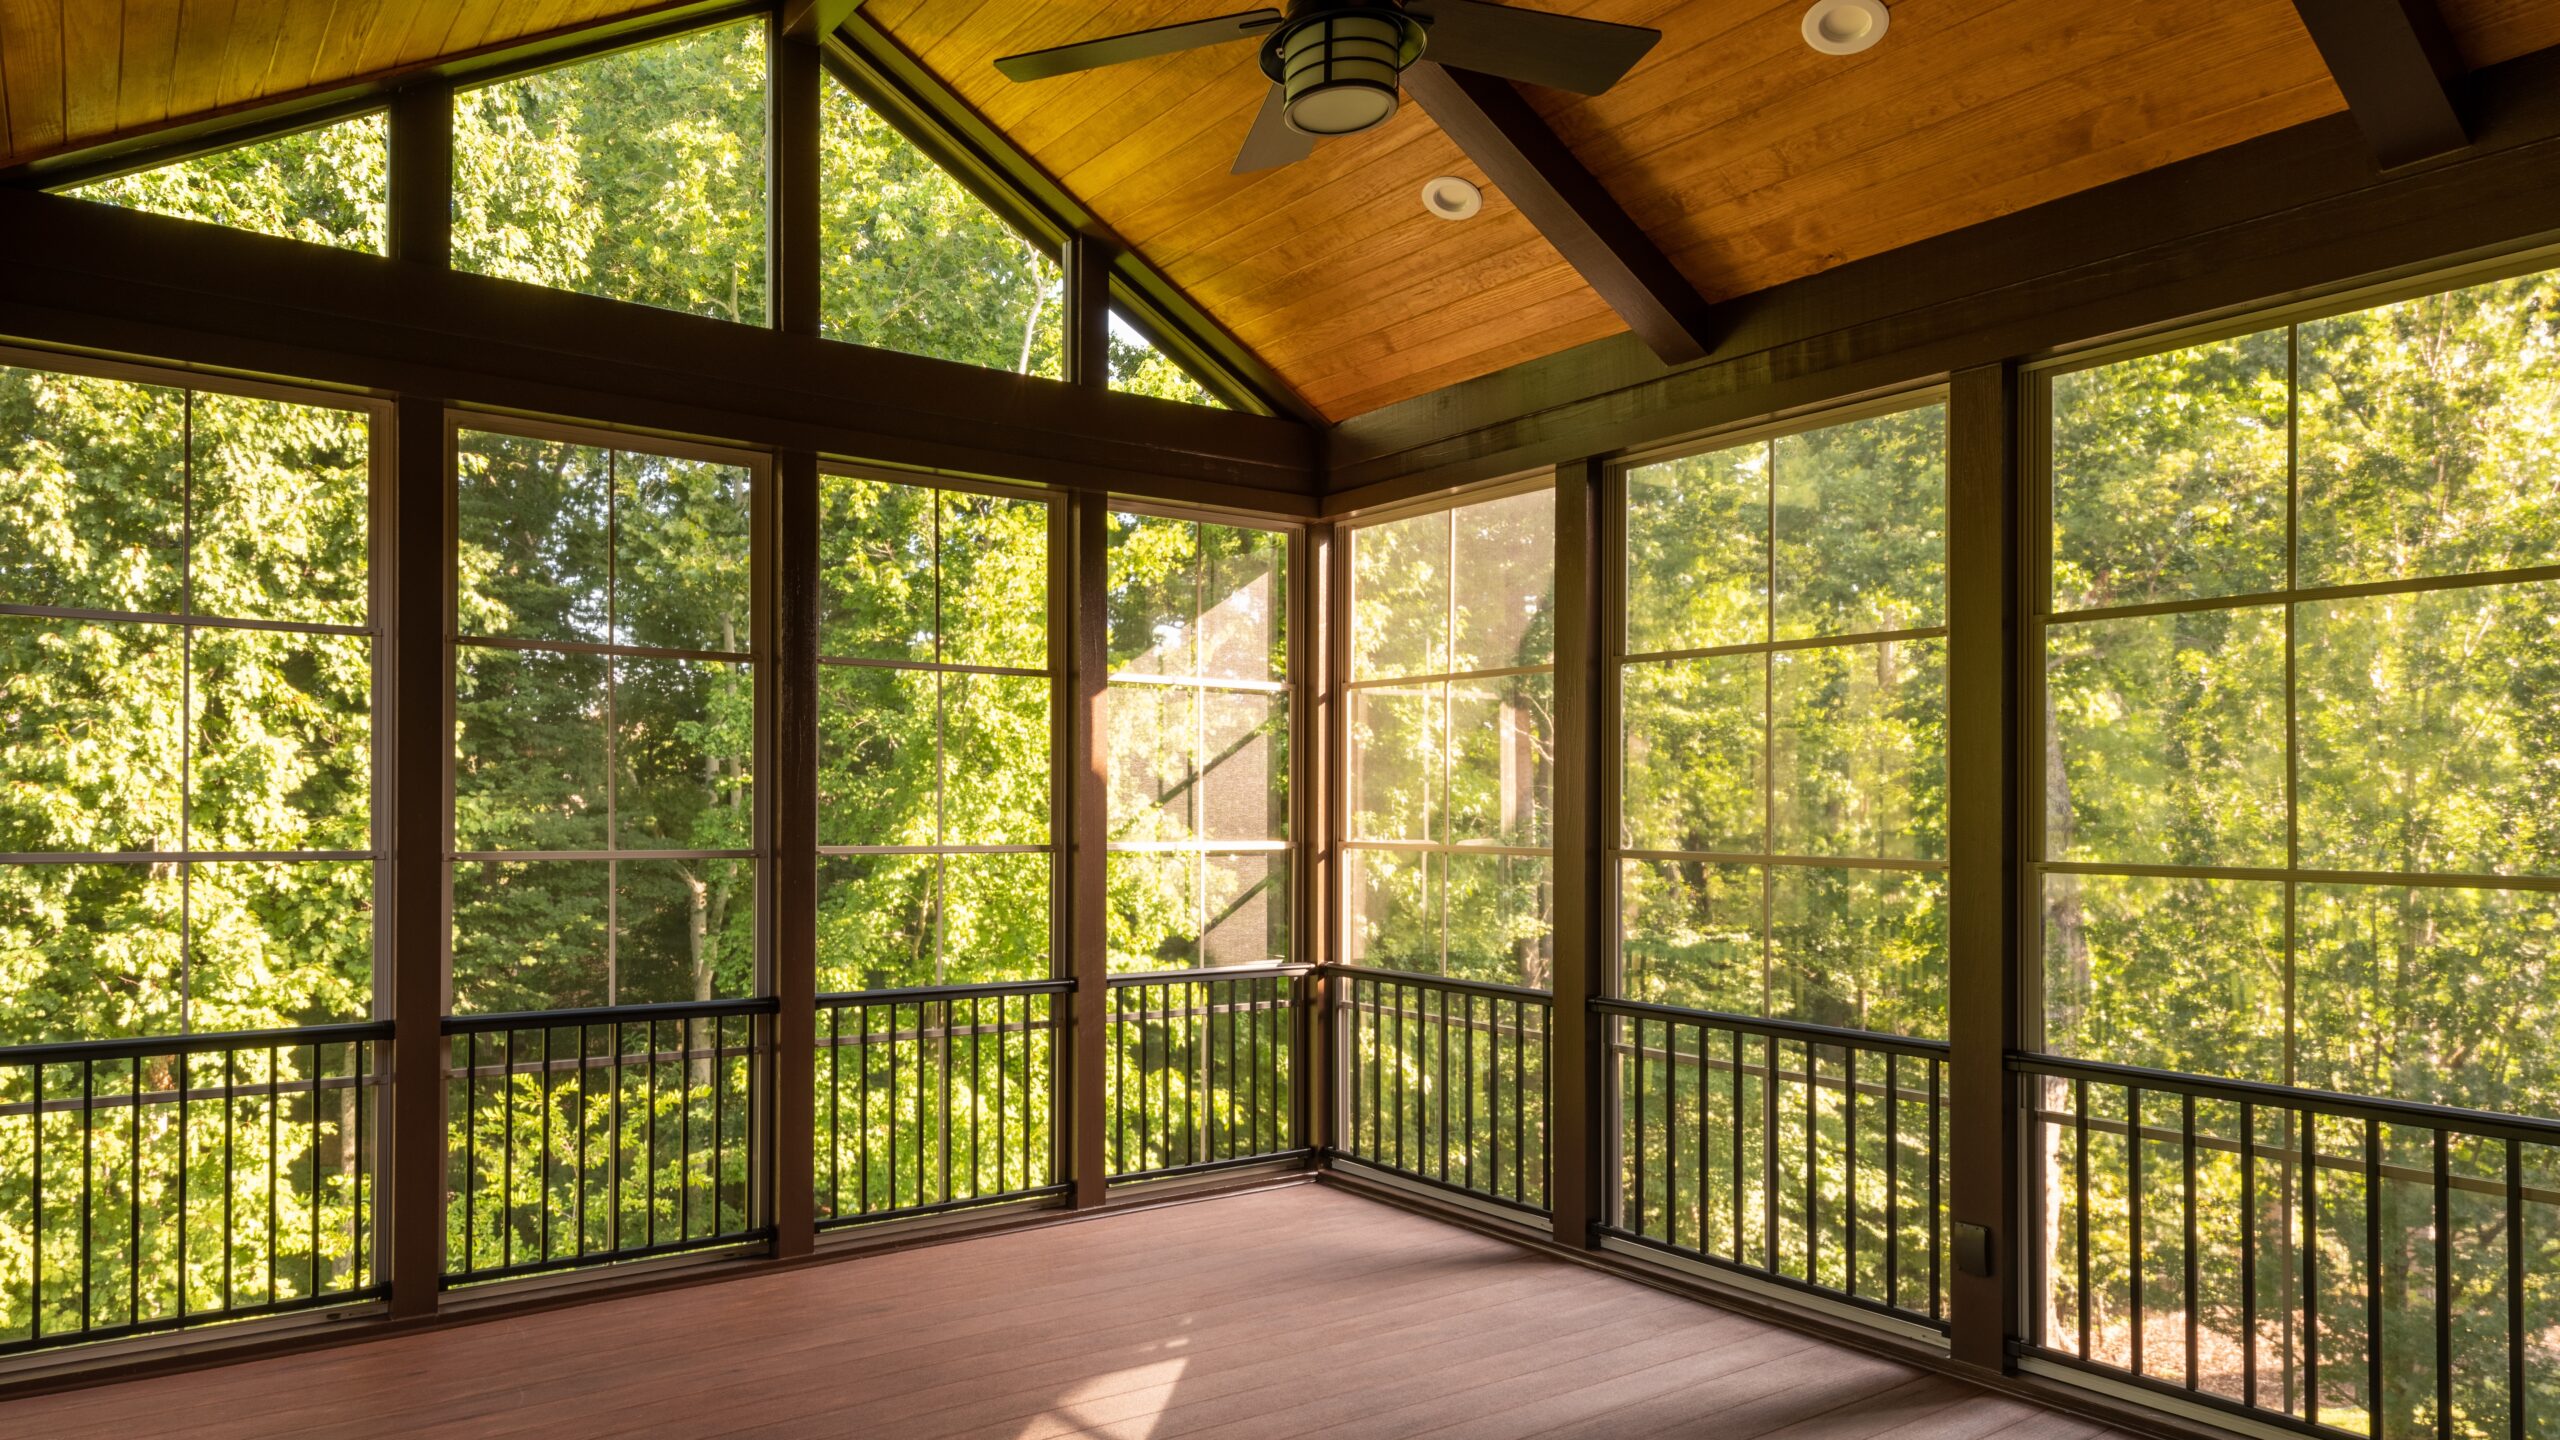 A sunroom with wooden flooring, glass walls, and a ceiling fan